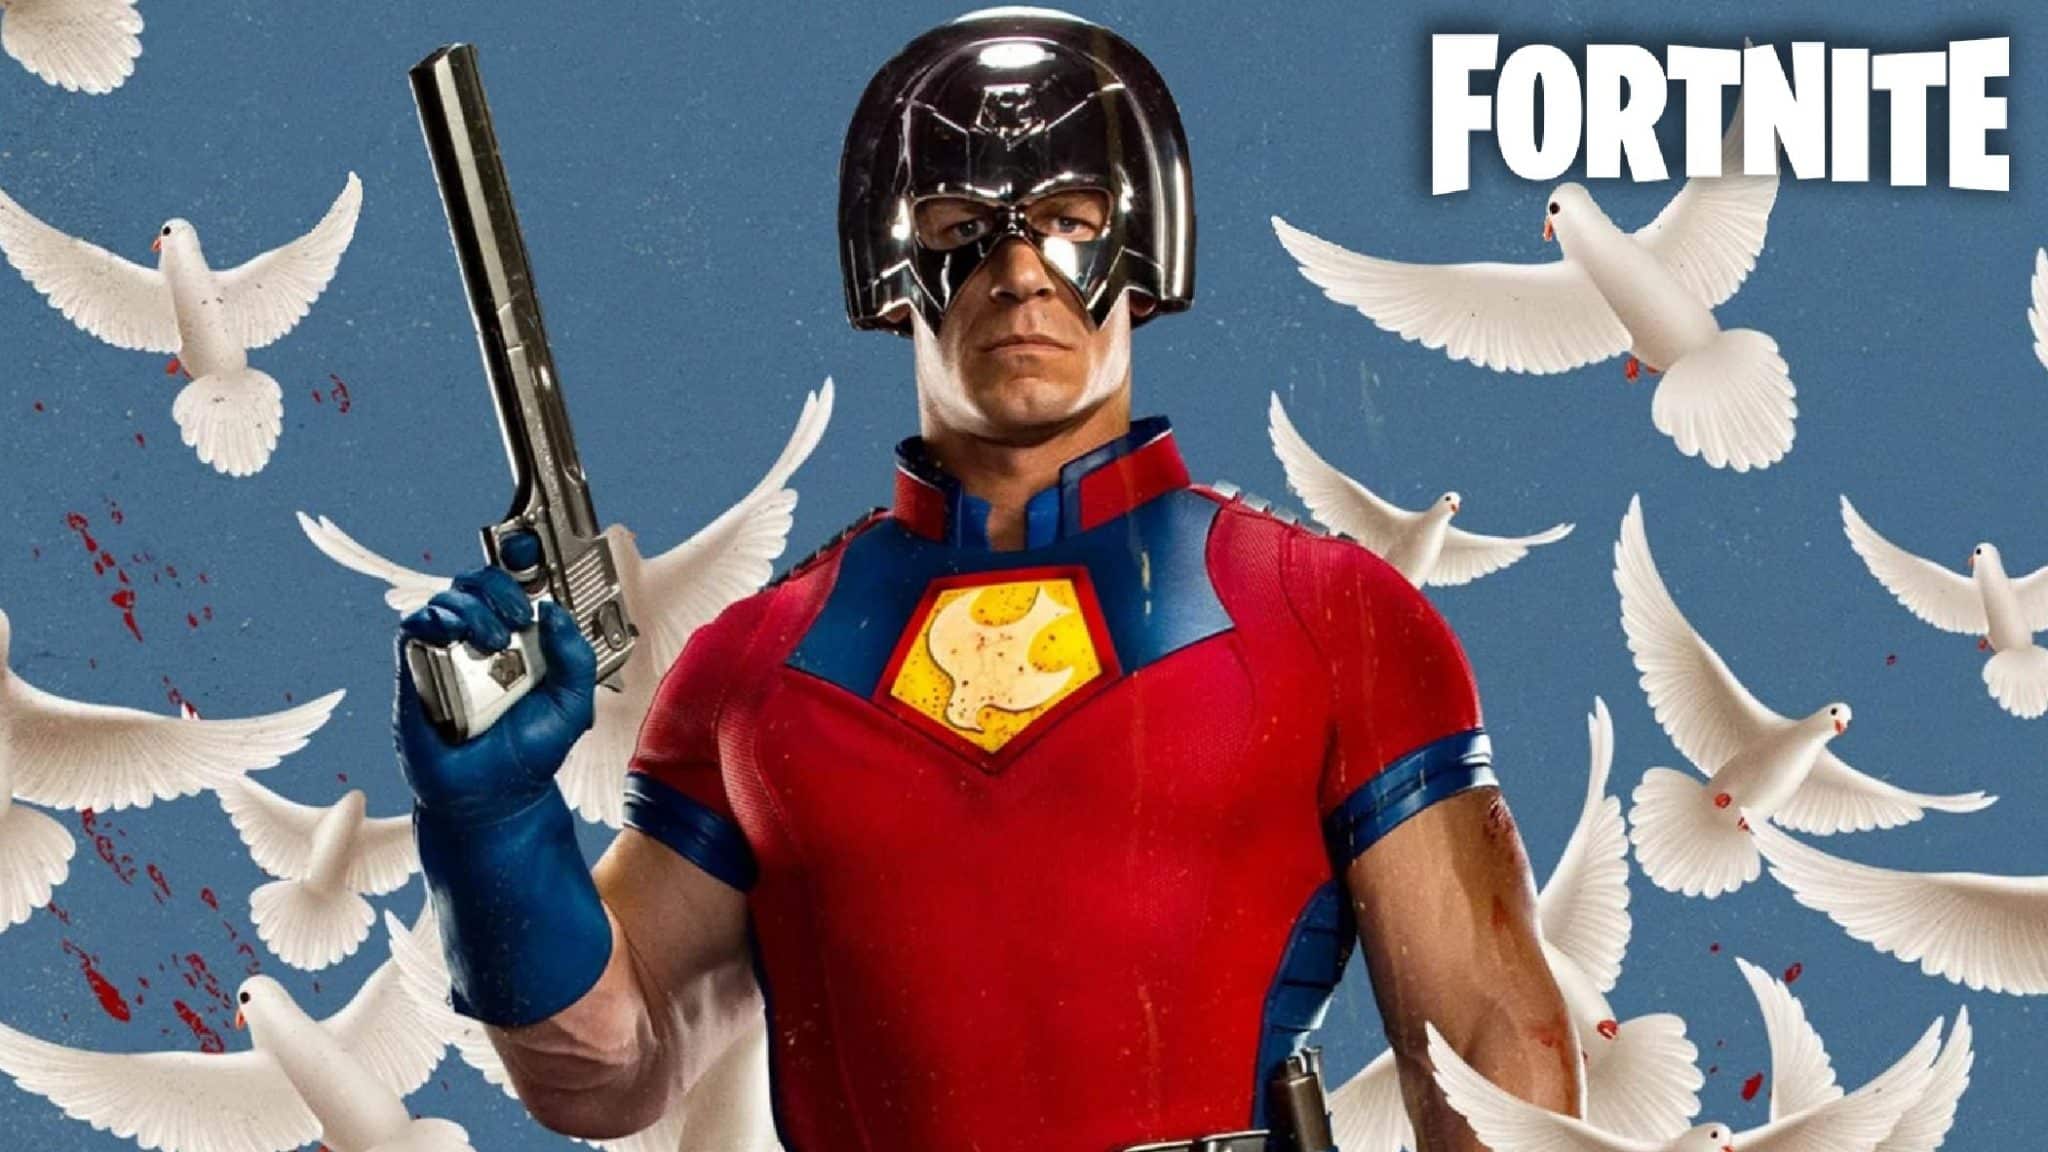 Peacemaker next to Fortnite logo